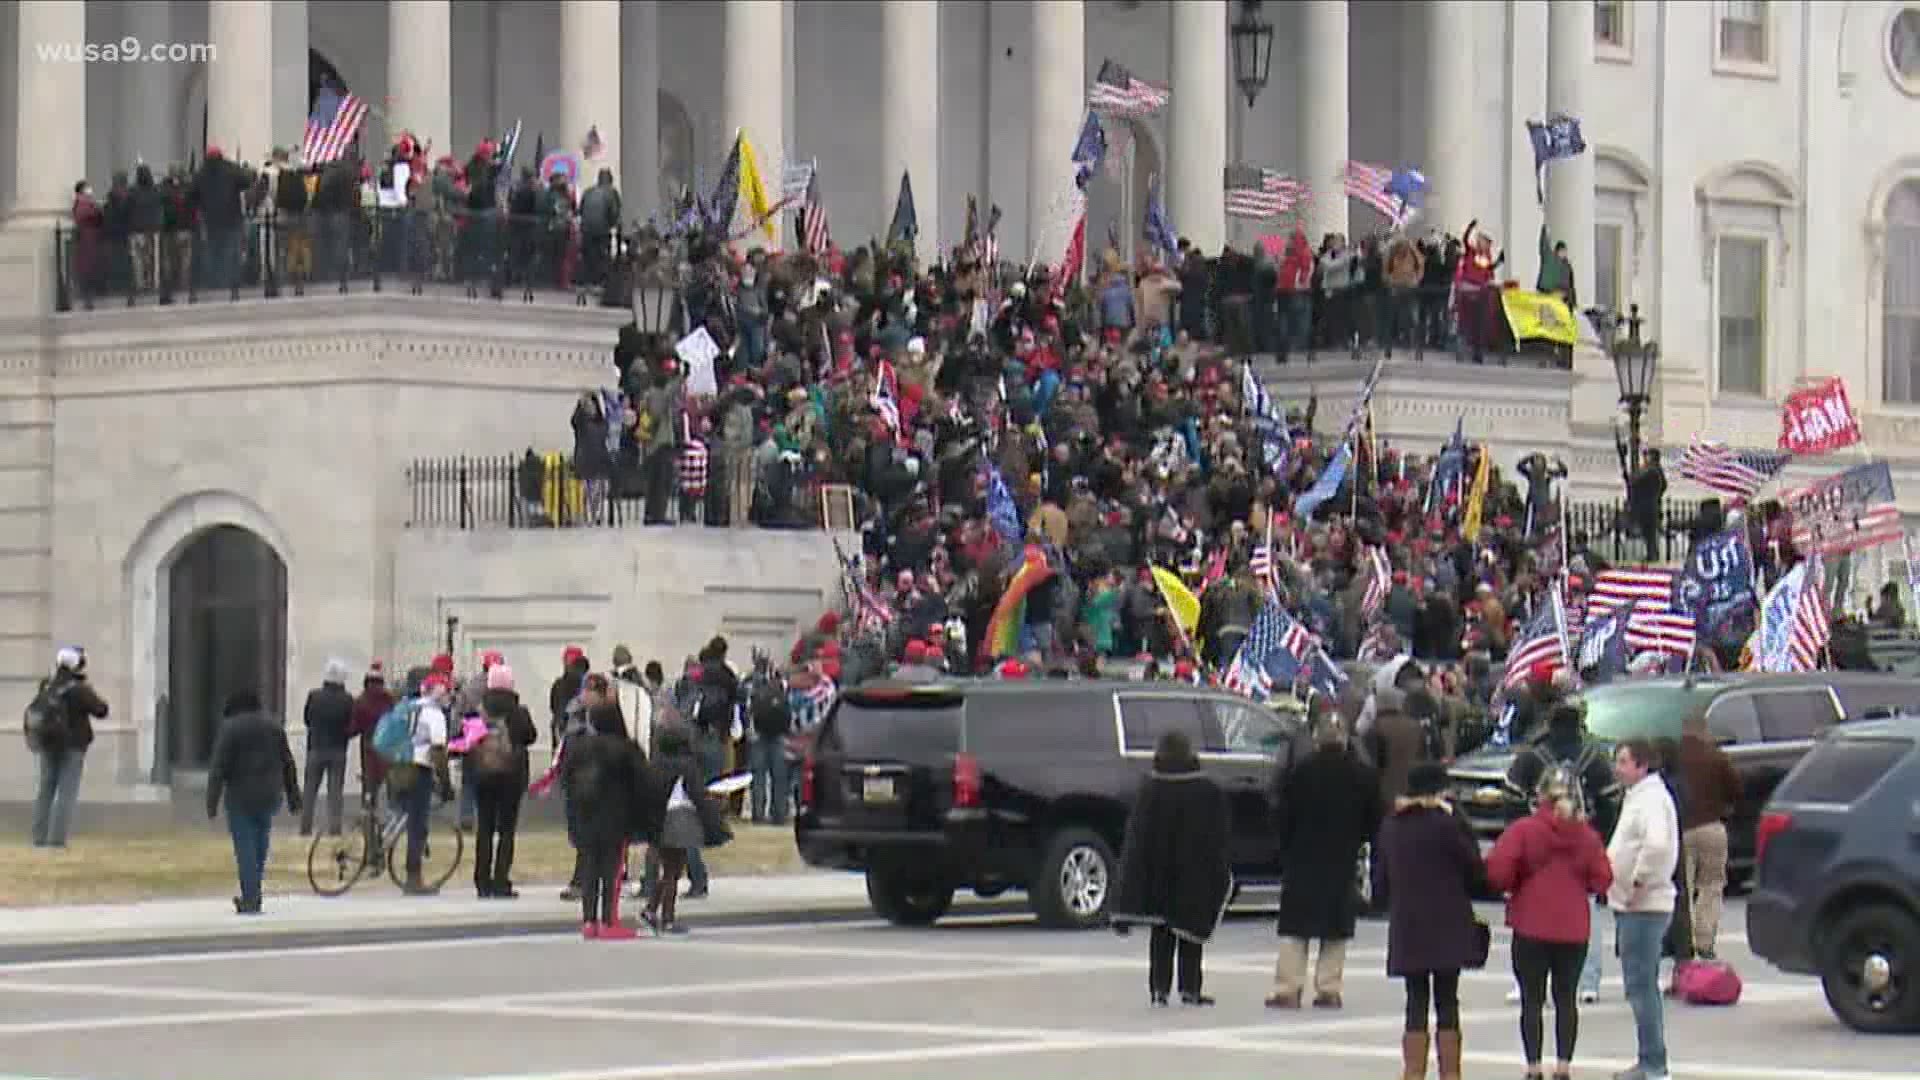 Roads are shut down around the U.S. Capitol, where protesters broke down barricades and charged the steps and clashing with police.